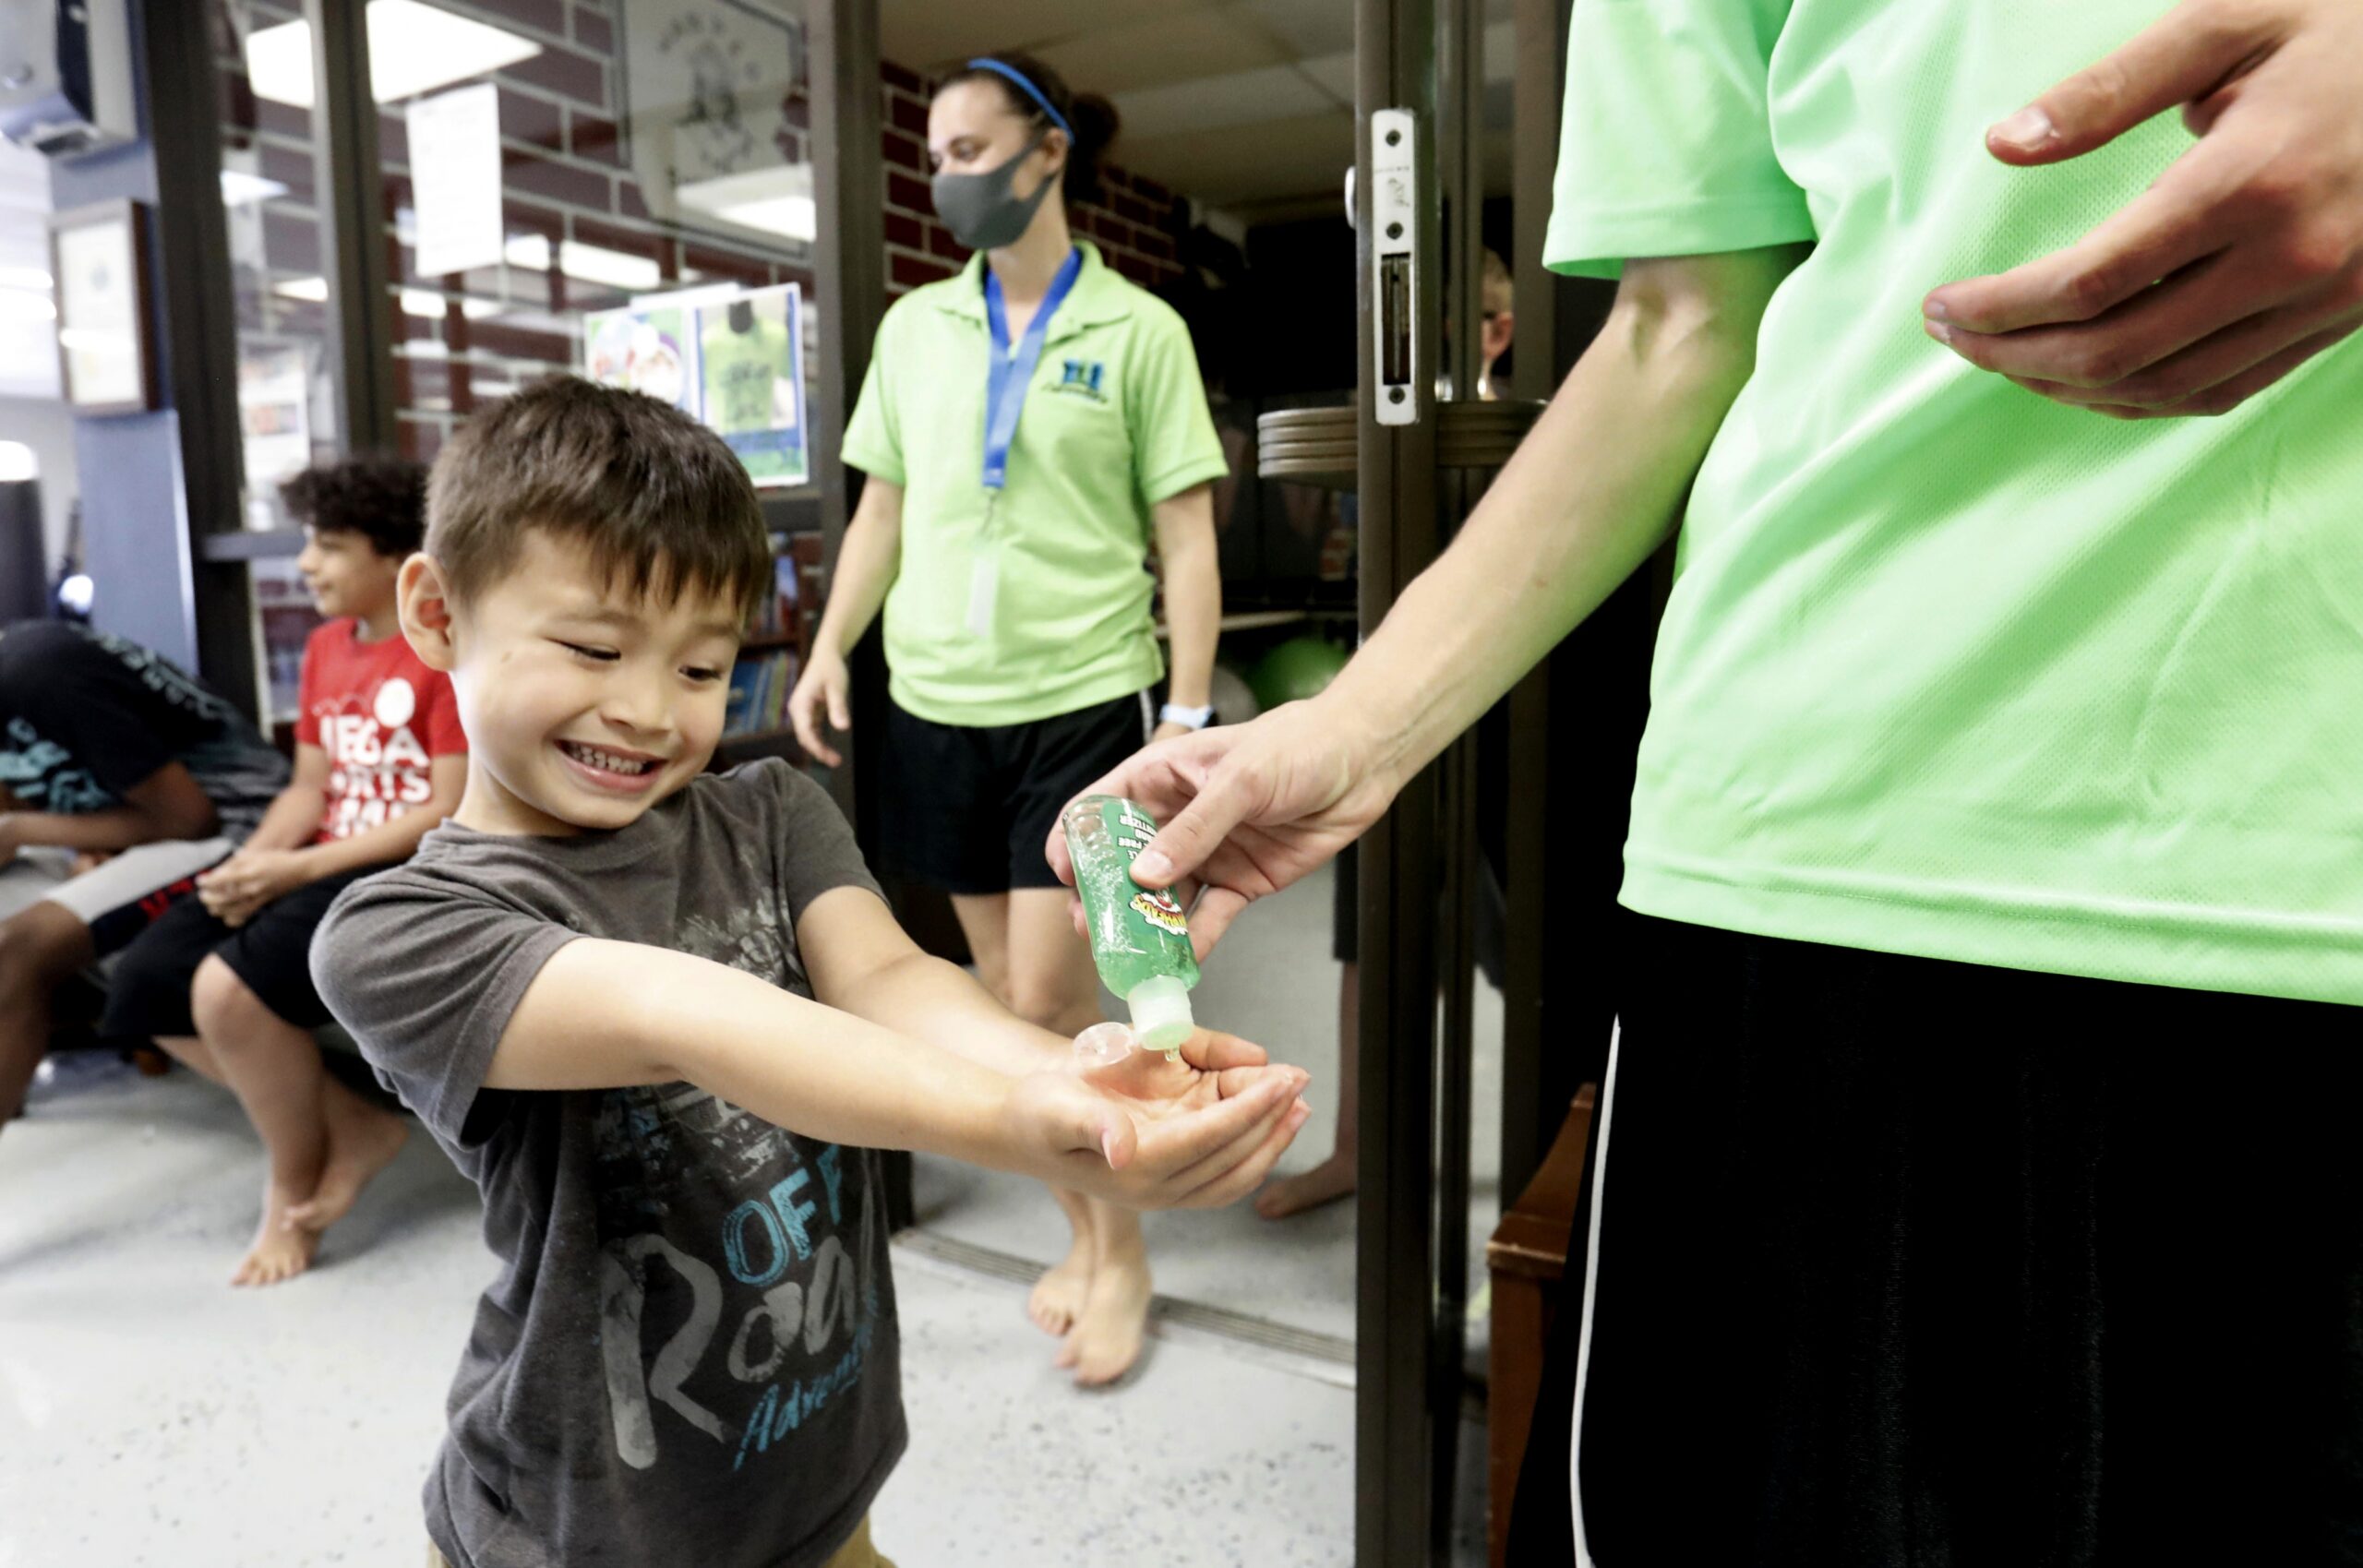 Bruce McCall, 5, smiles as he takes hand sanitizer during martial arts daycare summer camp